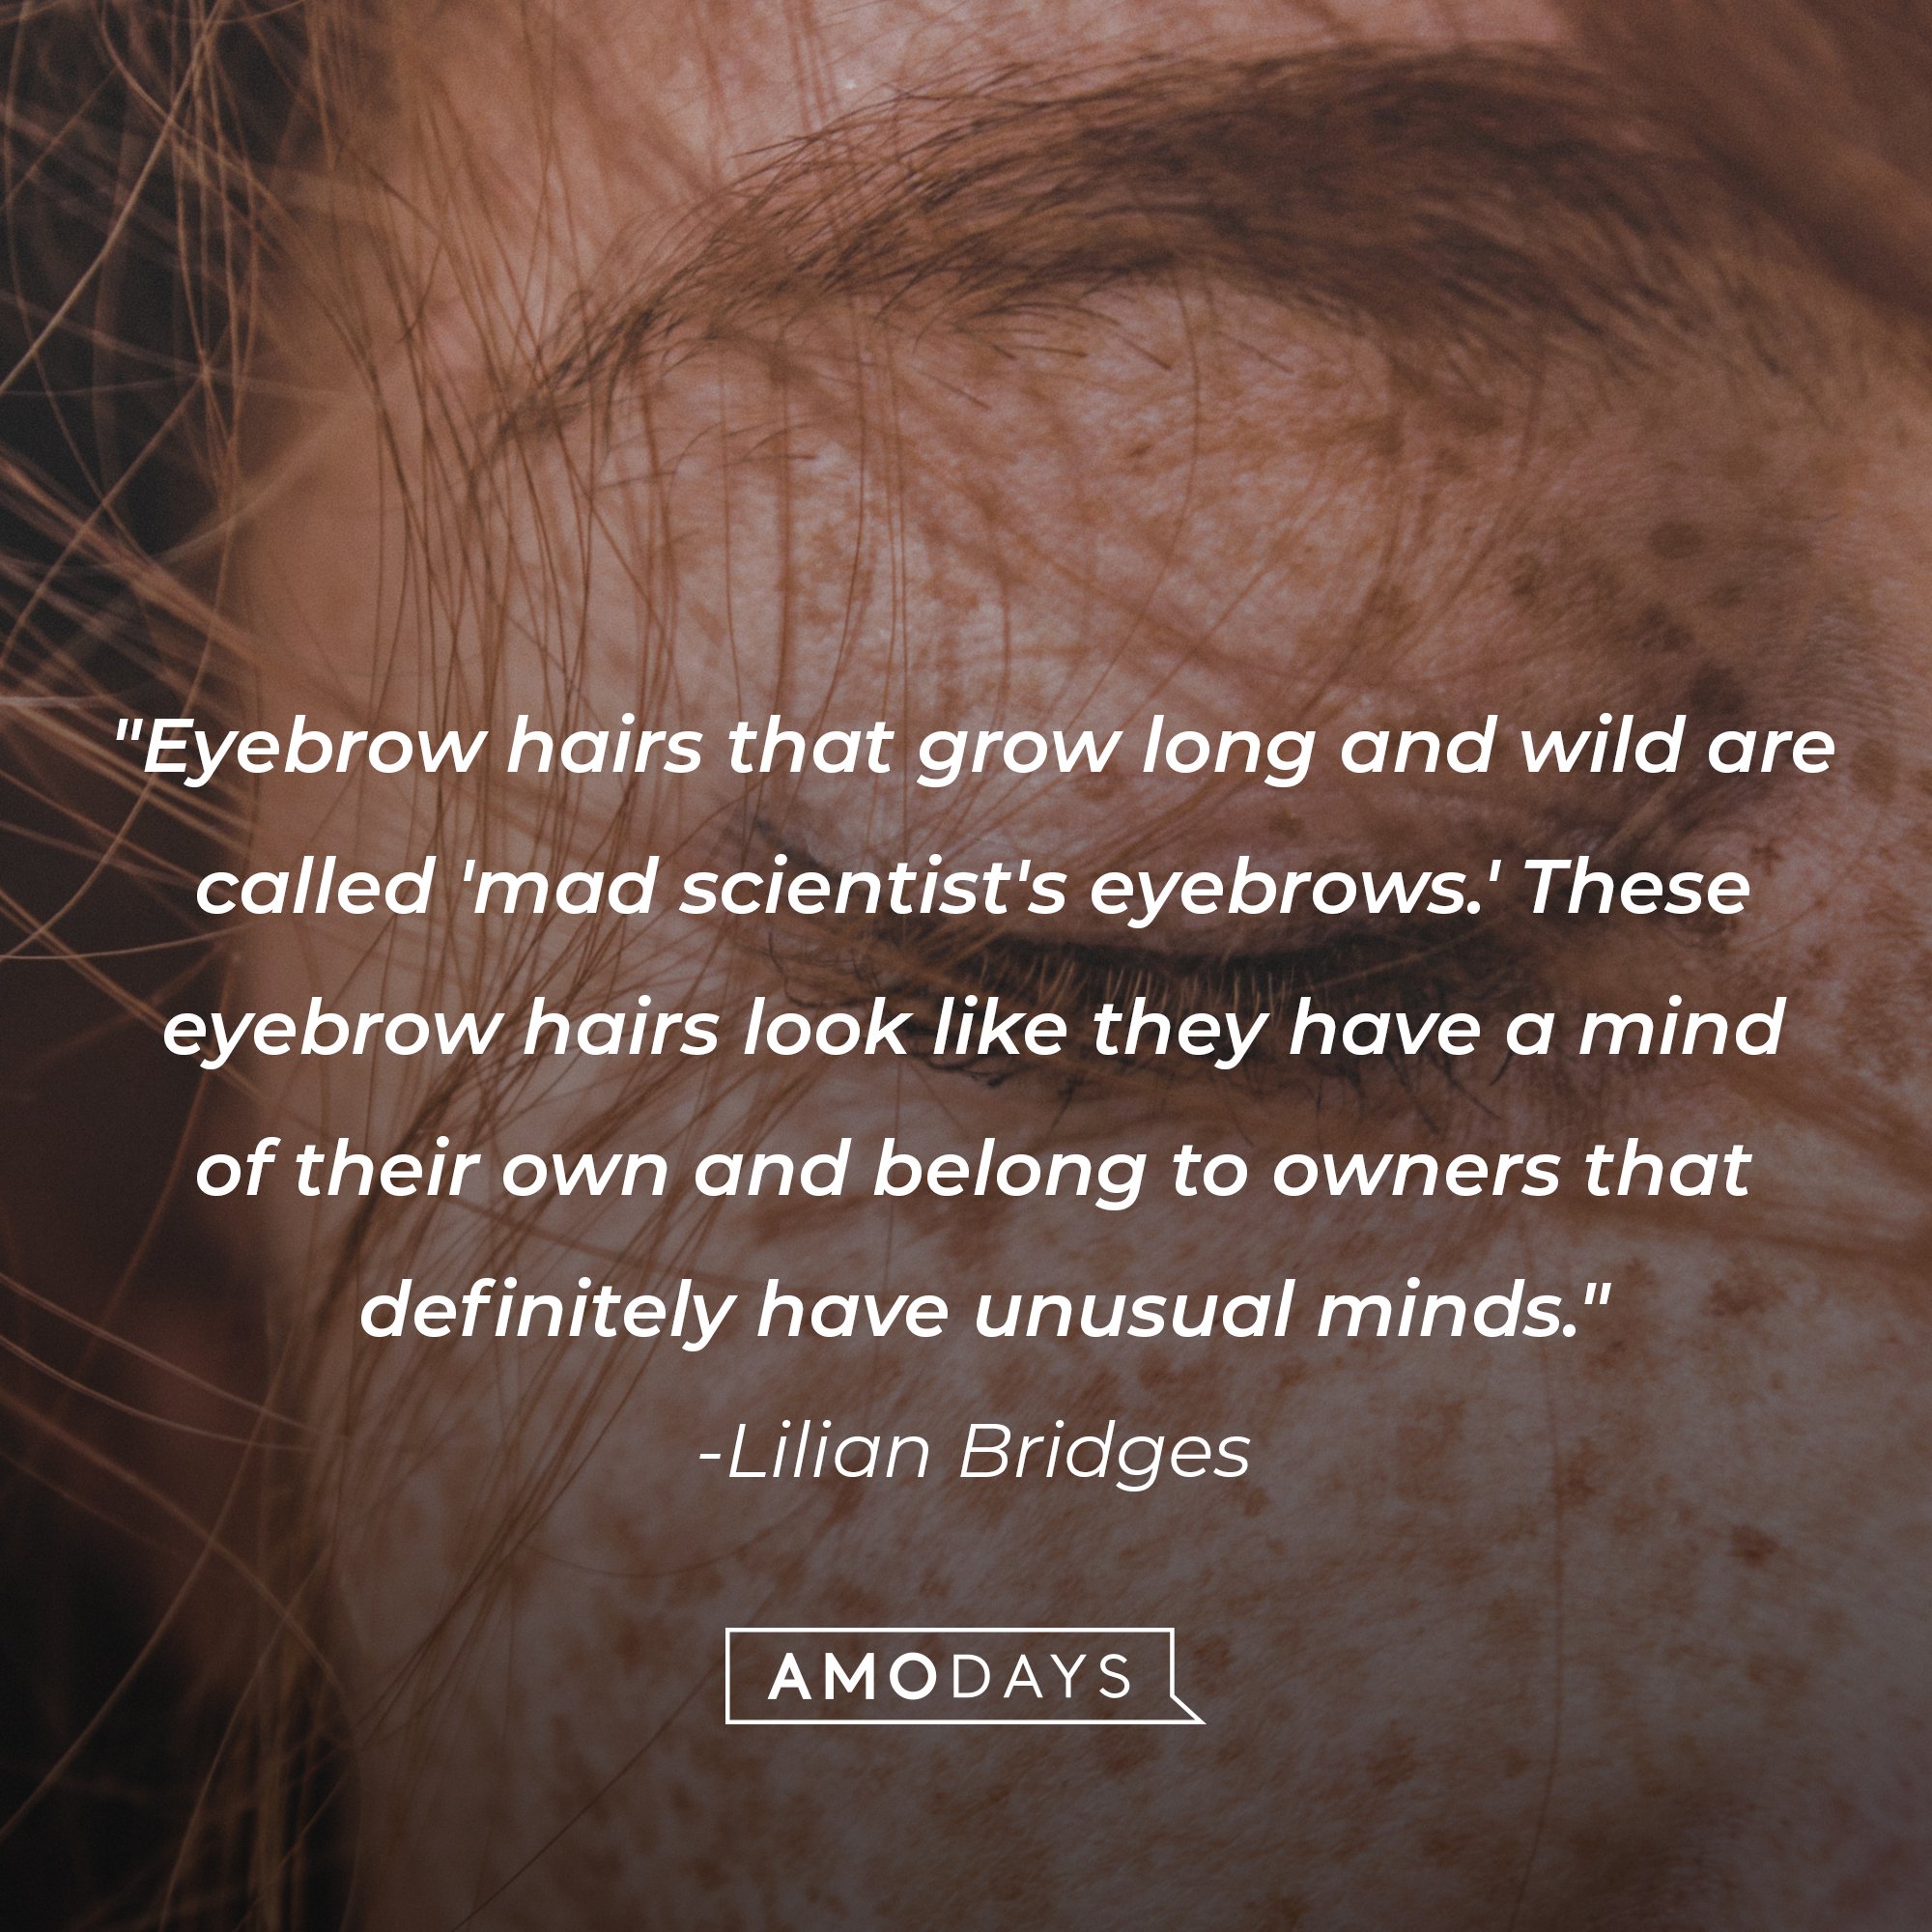 Lilian Bridges’ quote: "Eyebrow hairs that grow long and wild are called 'mad scientist's eyebrows.' These eyebrow hairs look like they have a mind of their own and belong to owners that definitely have unusual minds." | Image: AmoDays 